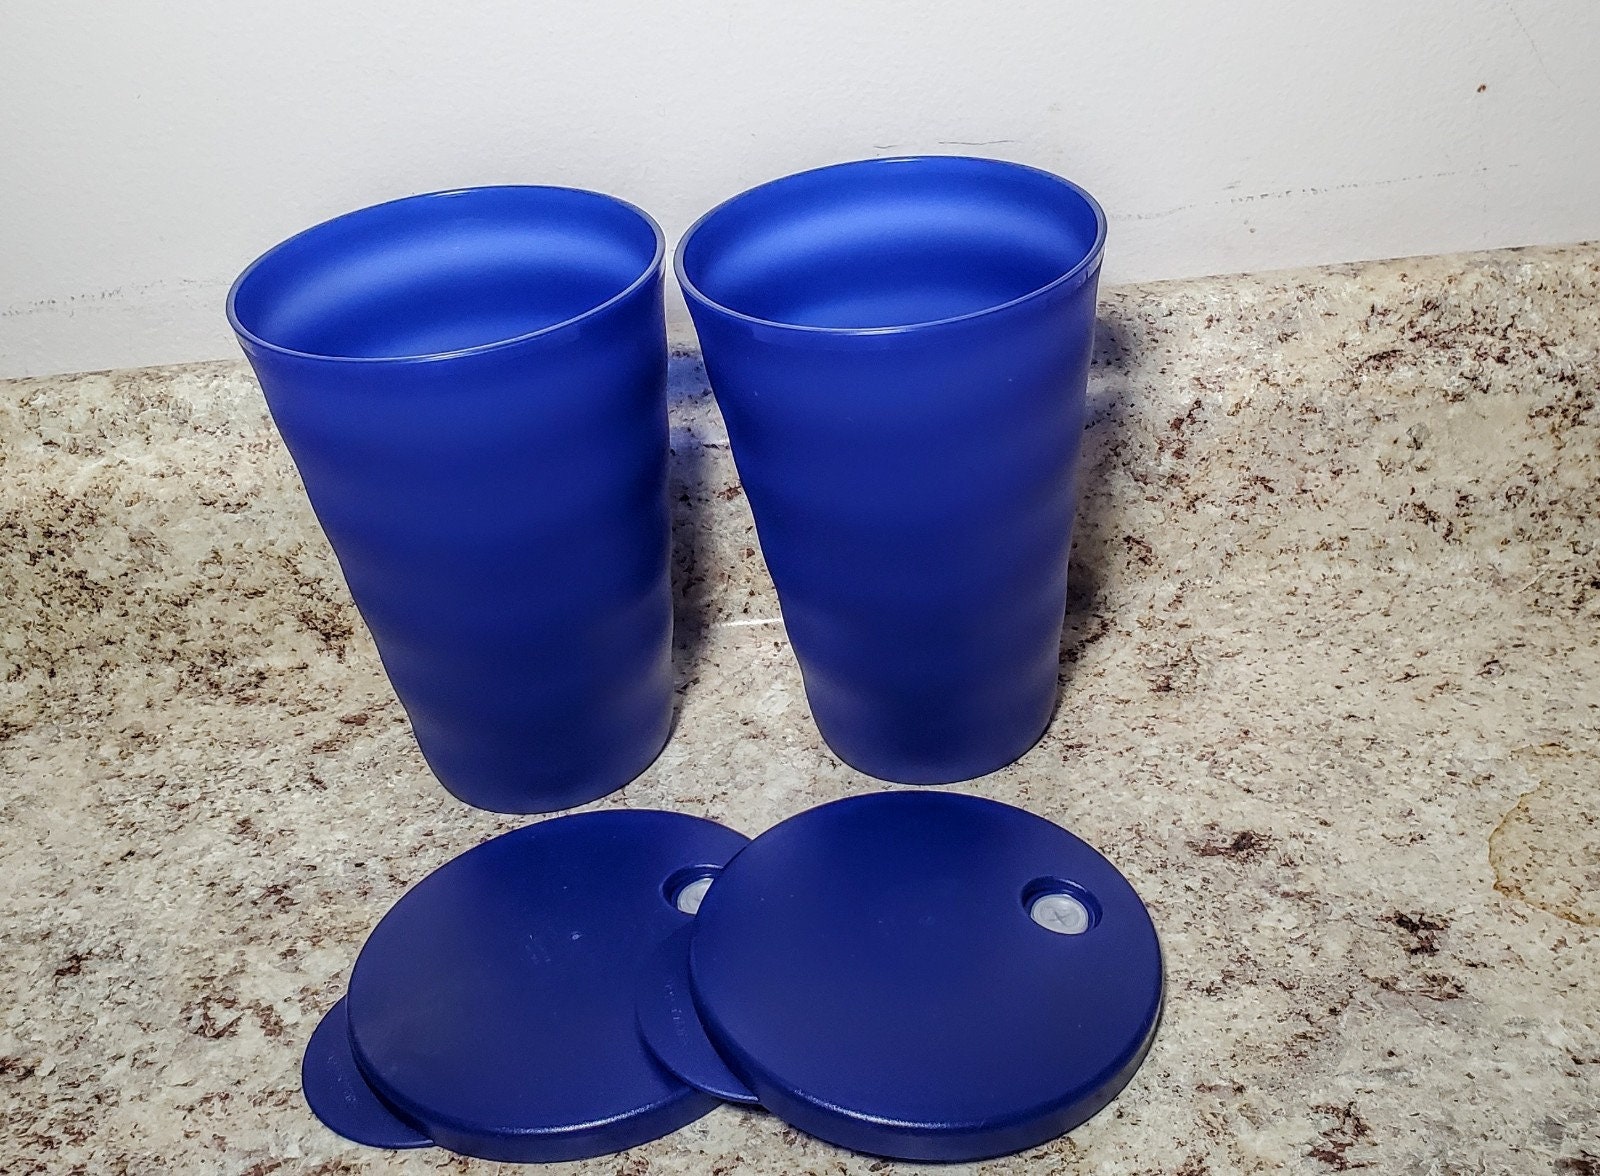 True Blue Party Cups, Disposable Cups, Drink Cups for Cocktails and Beer,  16 Ounce Capacity, Plastic, Blue, Set of 50